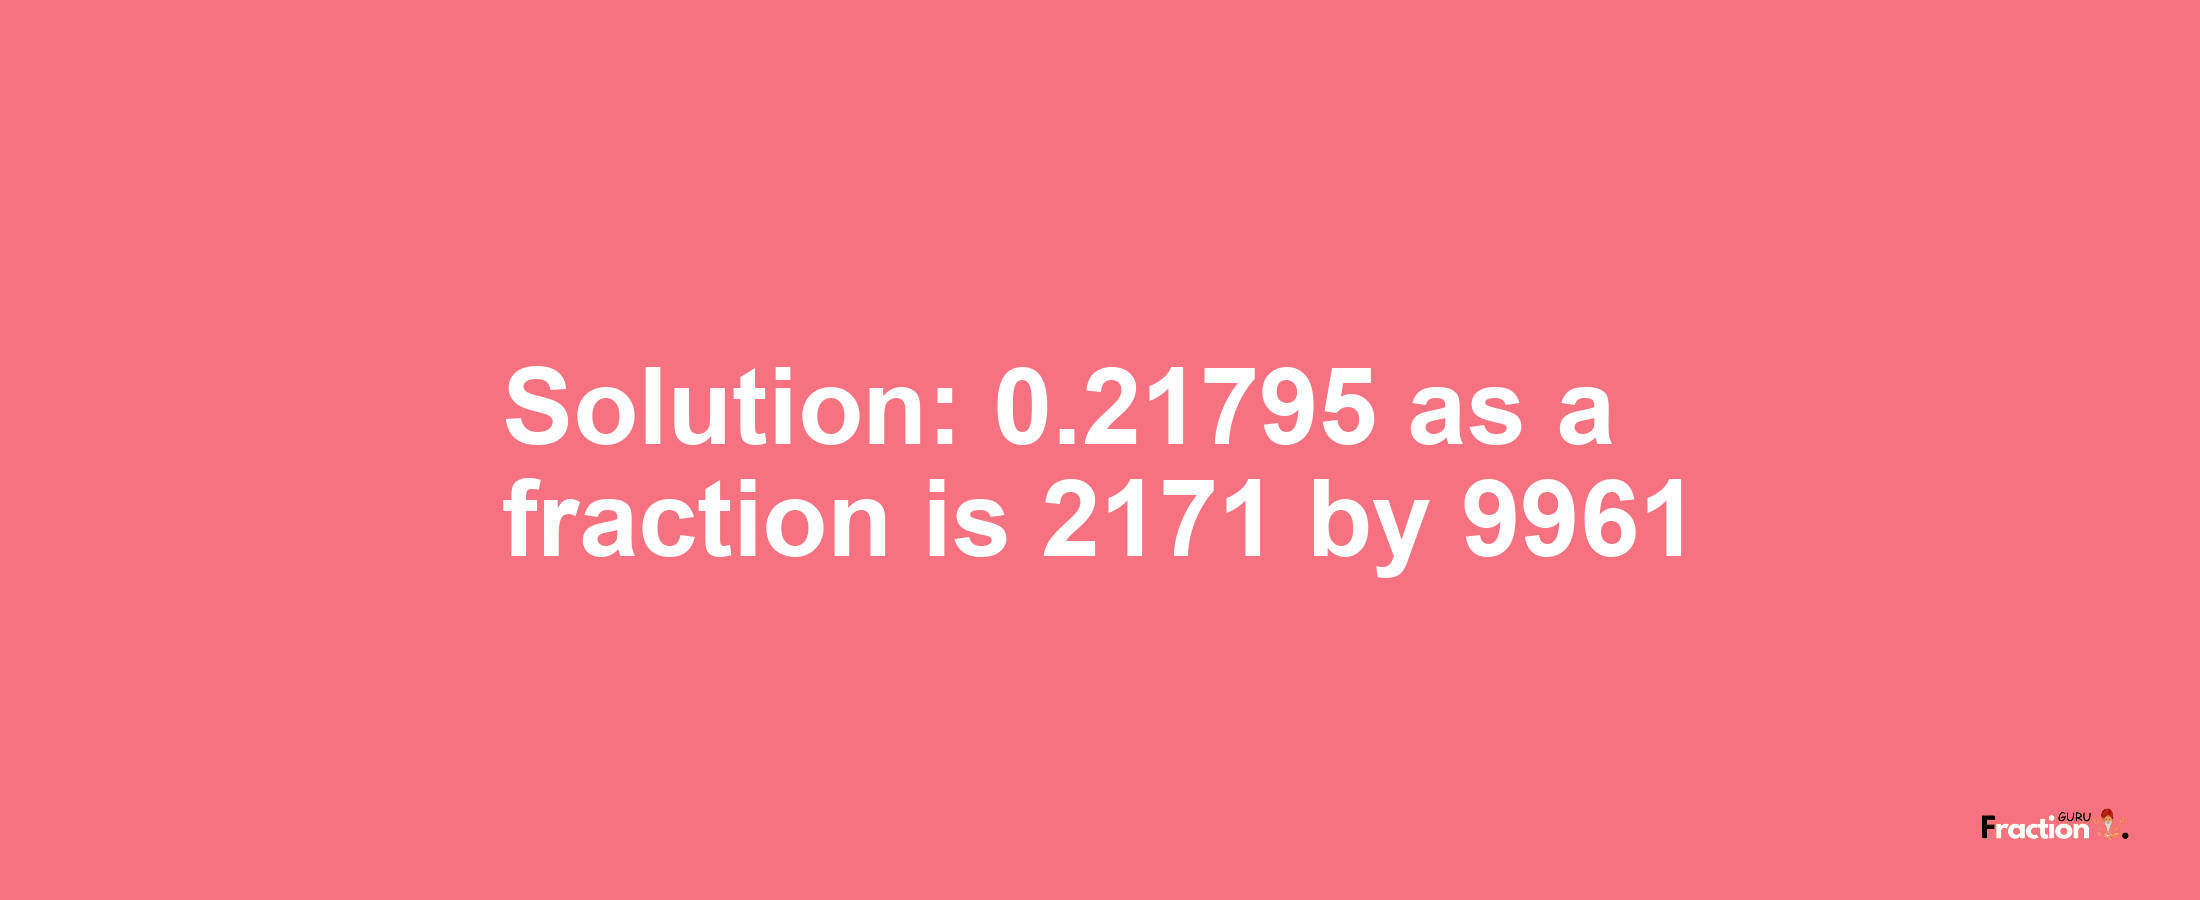 Solution:0.21795 as a fraction is 2171/9961